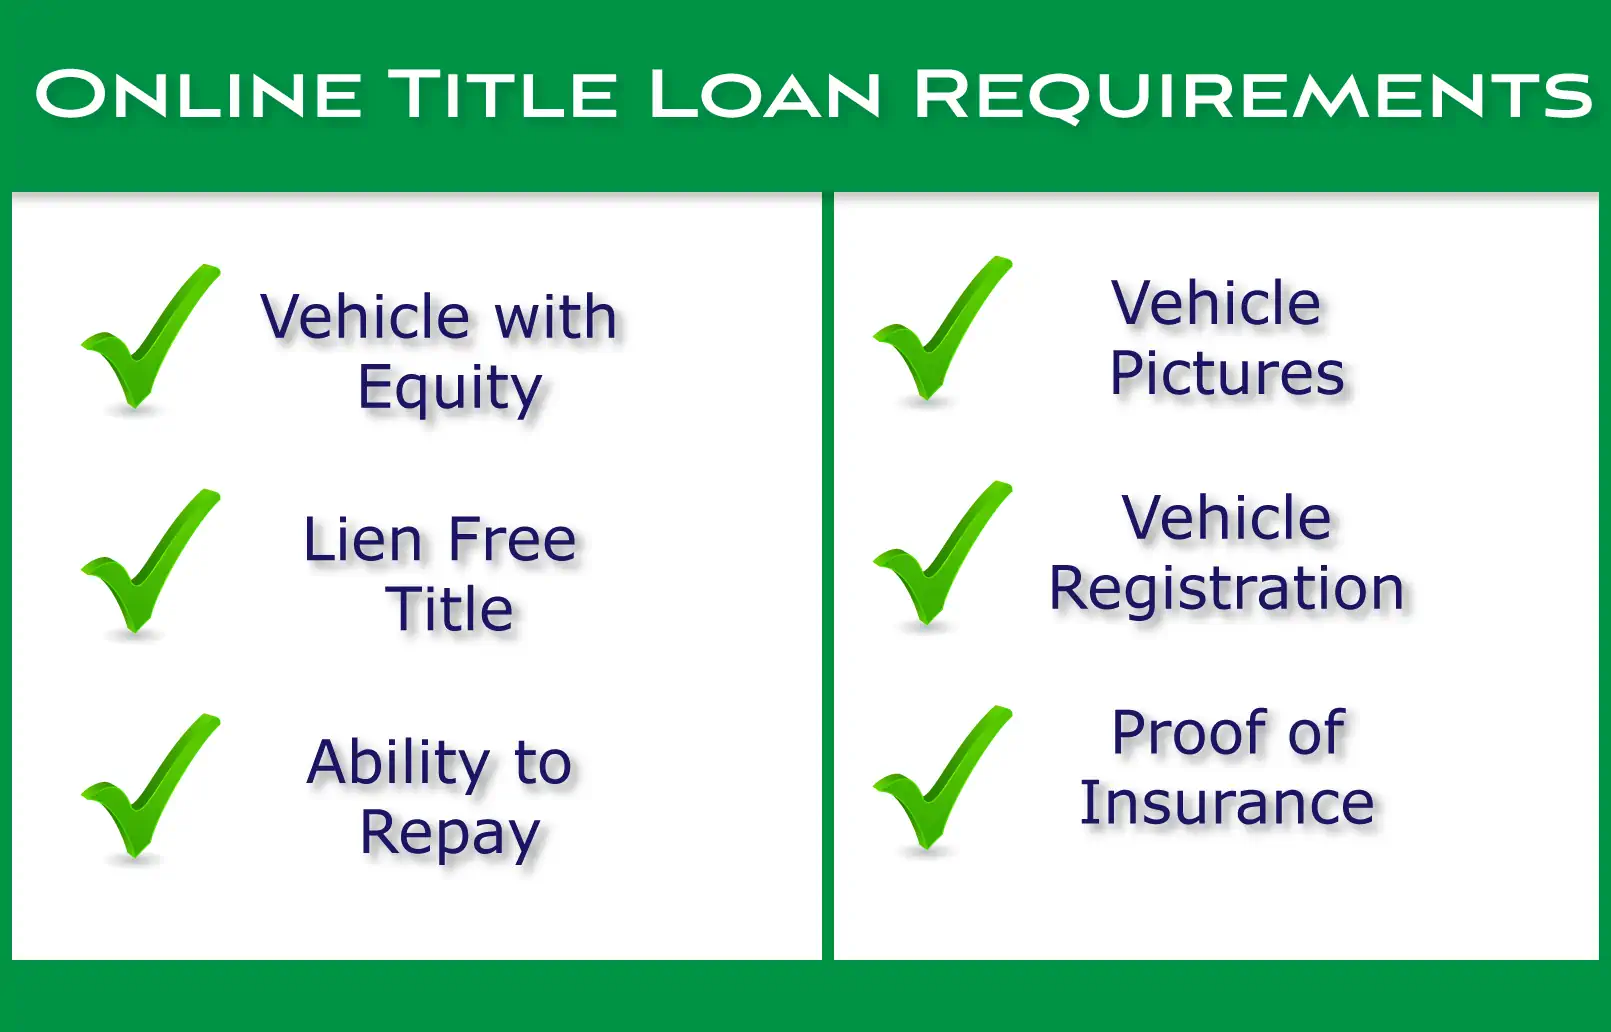 Online Title Loan Requirements